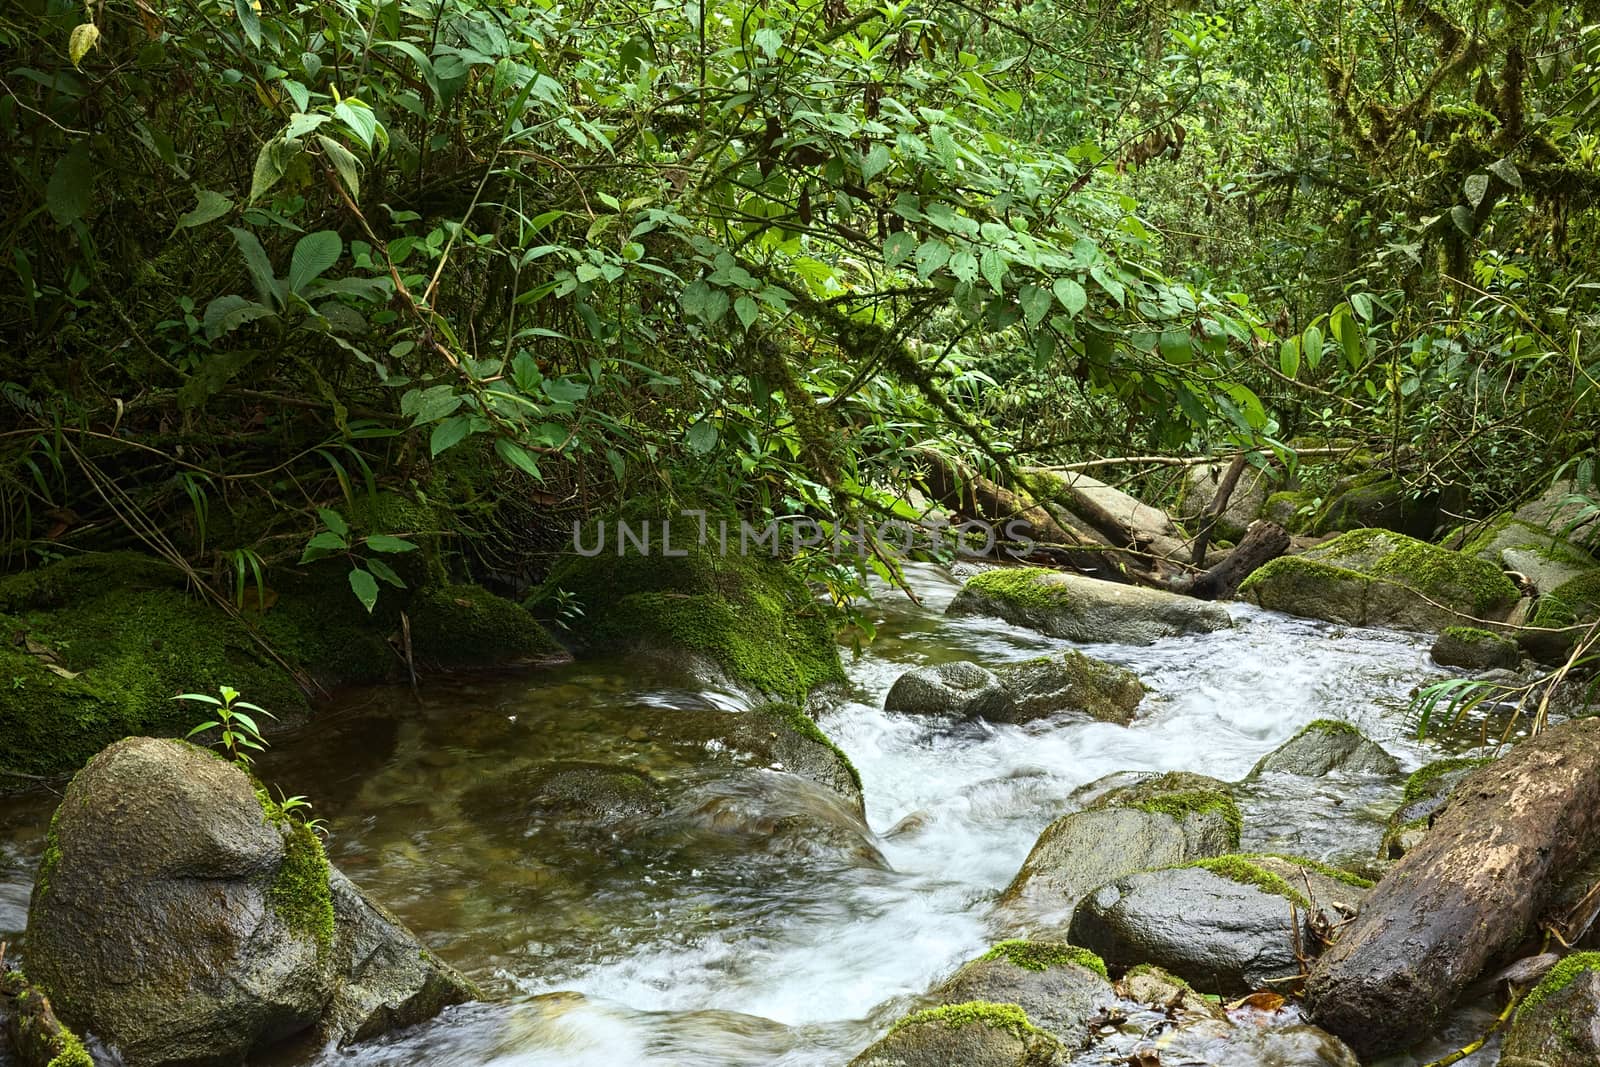 Small brook surrounded by rocks and lush vegetation in cloud forest in Ecuador close to the small town of Rio Verde